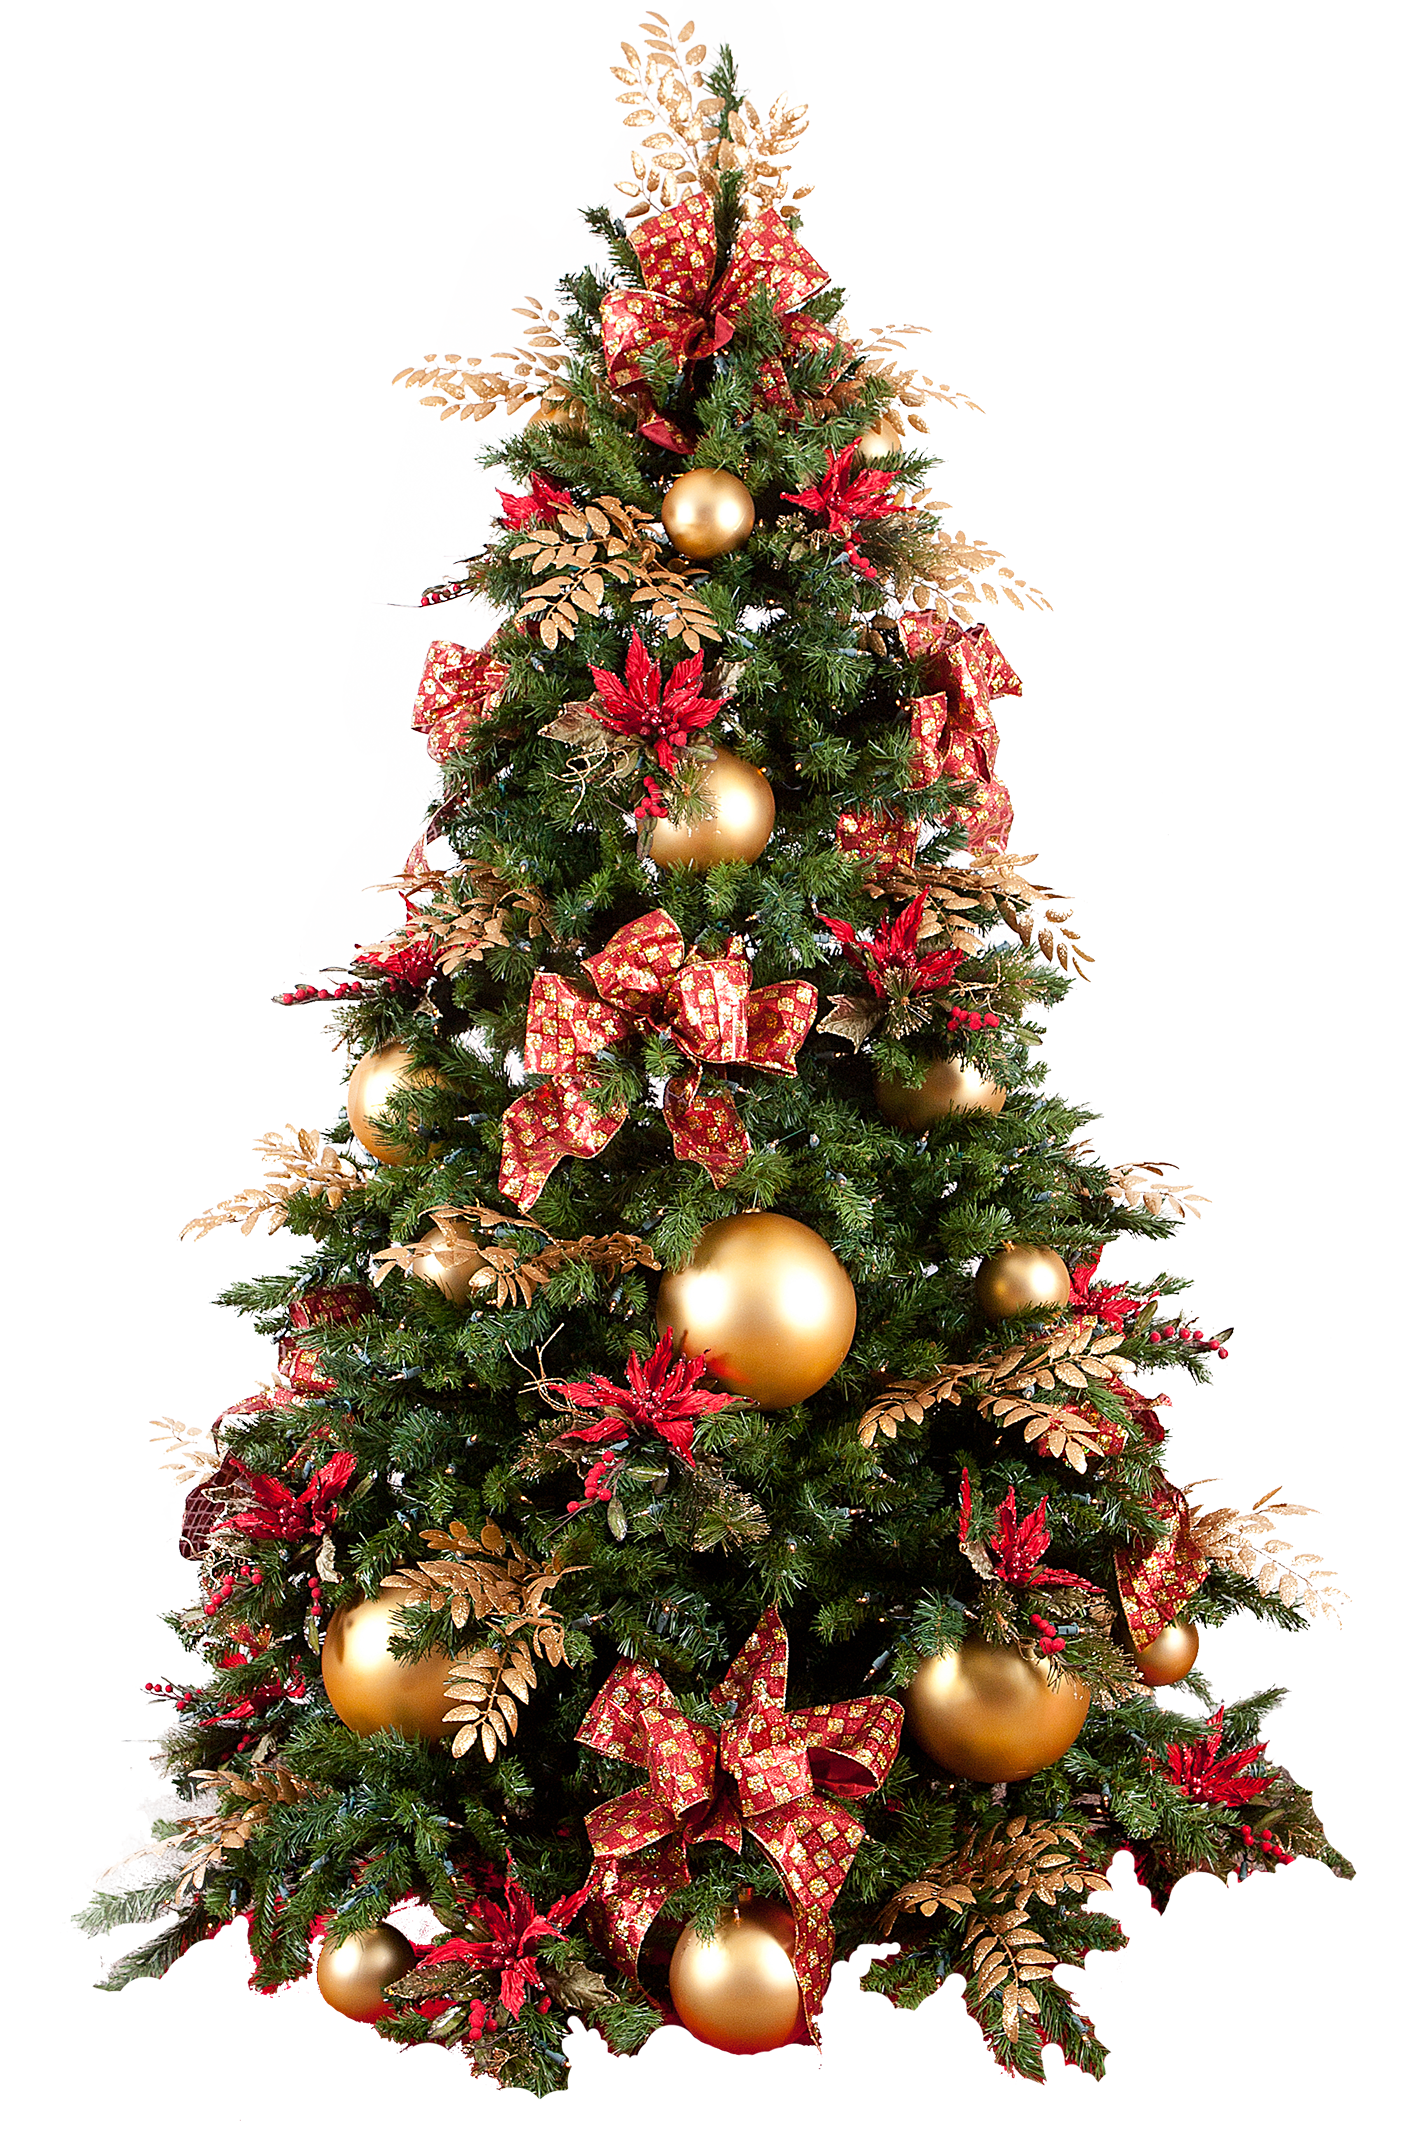 Christmas Happy Free Download Image PNG Image